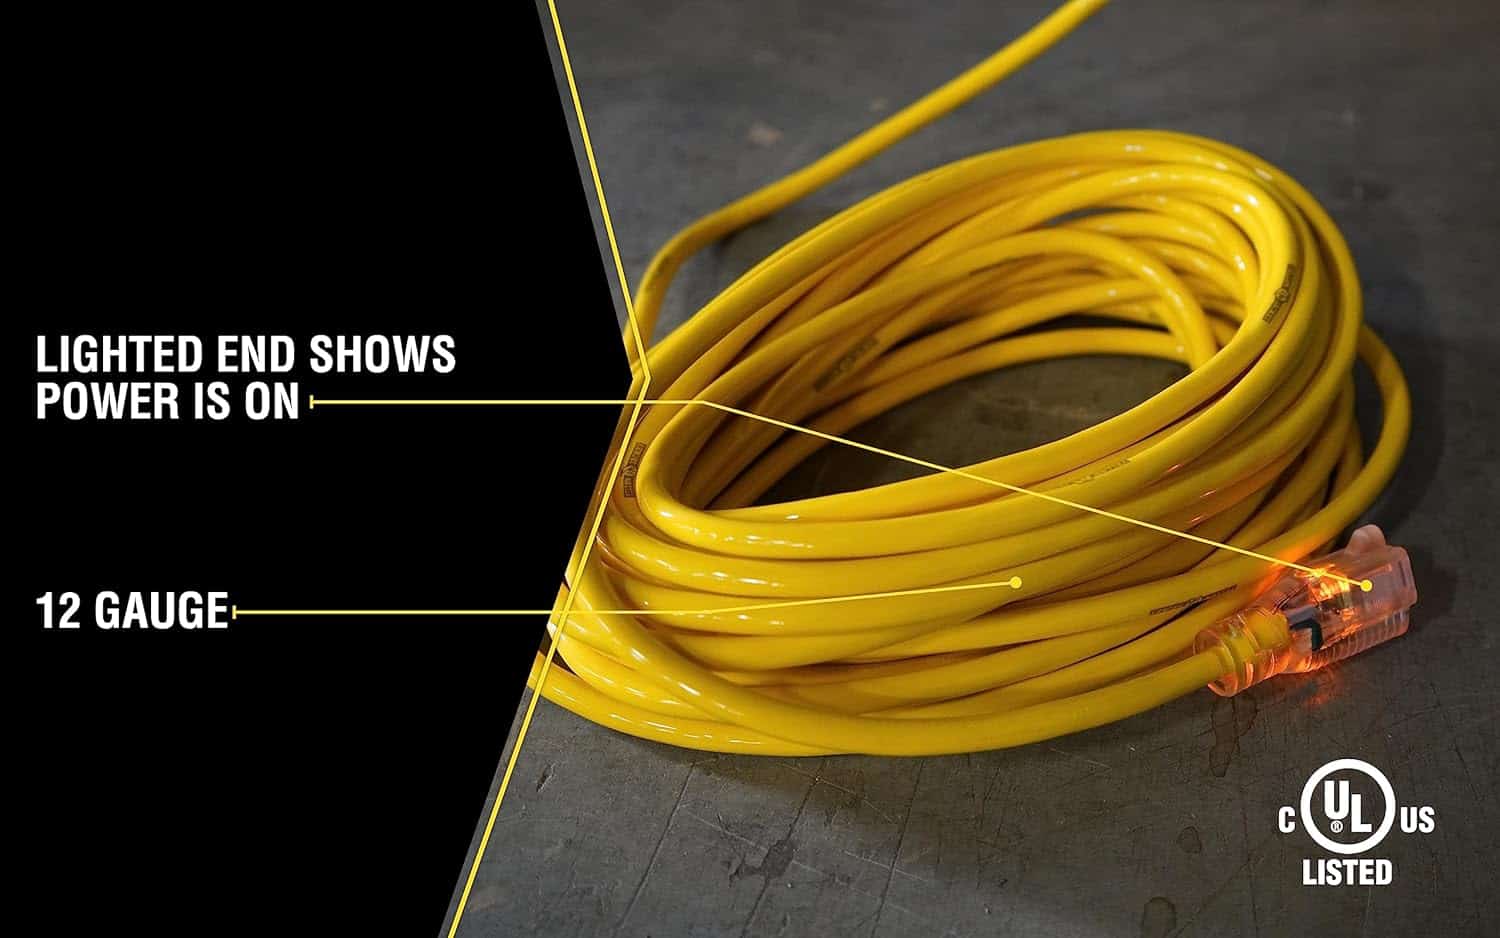 Yellow Jacket 2885 12 3 Heavy-Duty 15-Amp Premium SJTW Contractor Extension Cord with Lighted End, Ideal use With Heavy Duty Equipment and Tools Durable Molded Plugs 100 Feet Yellow 2